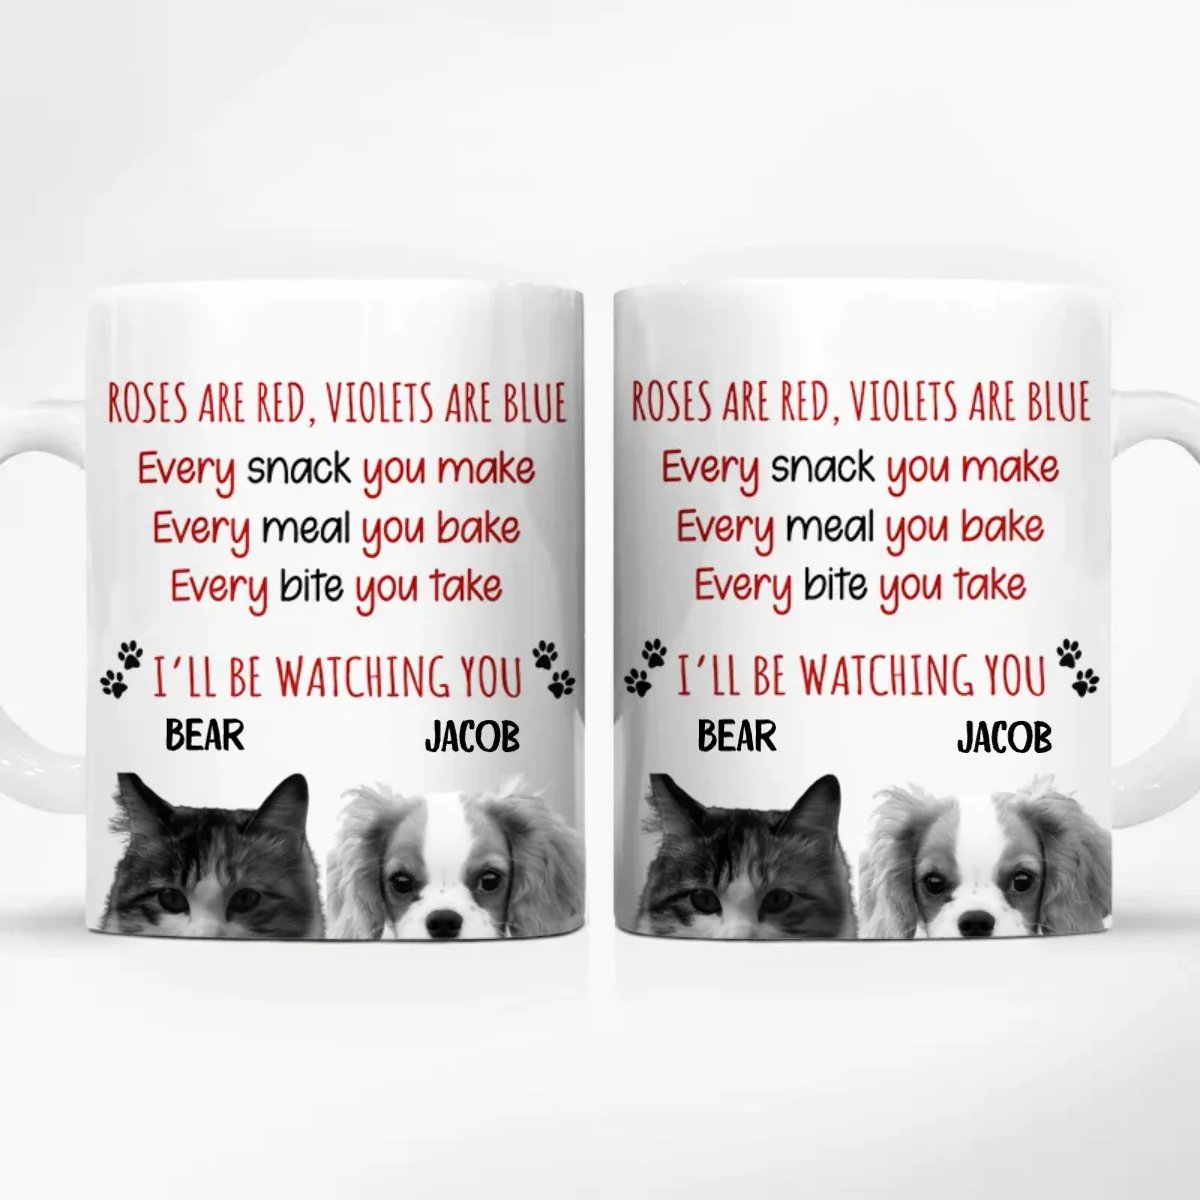 Pet Lovers - Roses Are Red Violets Are Blue - Personalized Mug (TL) - The Next Custom Gift